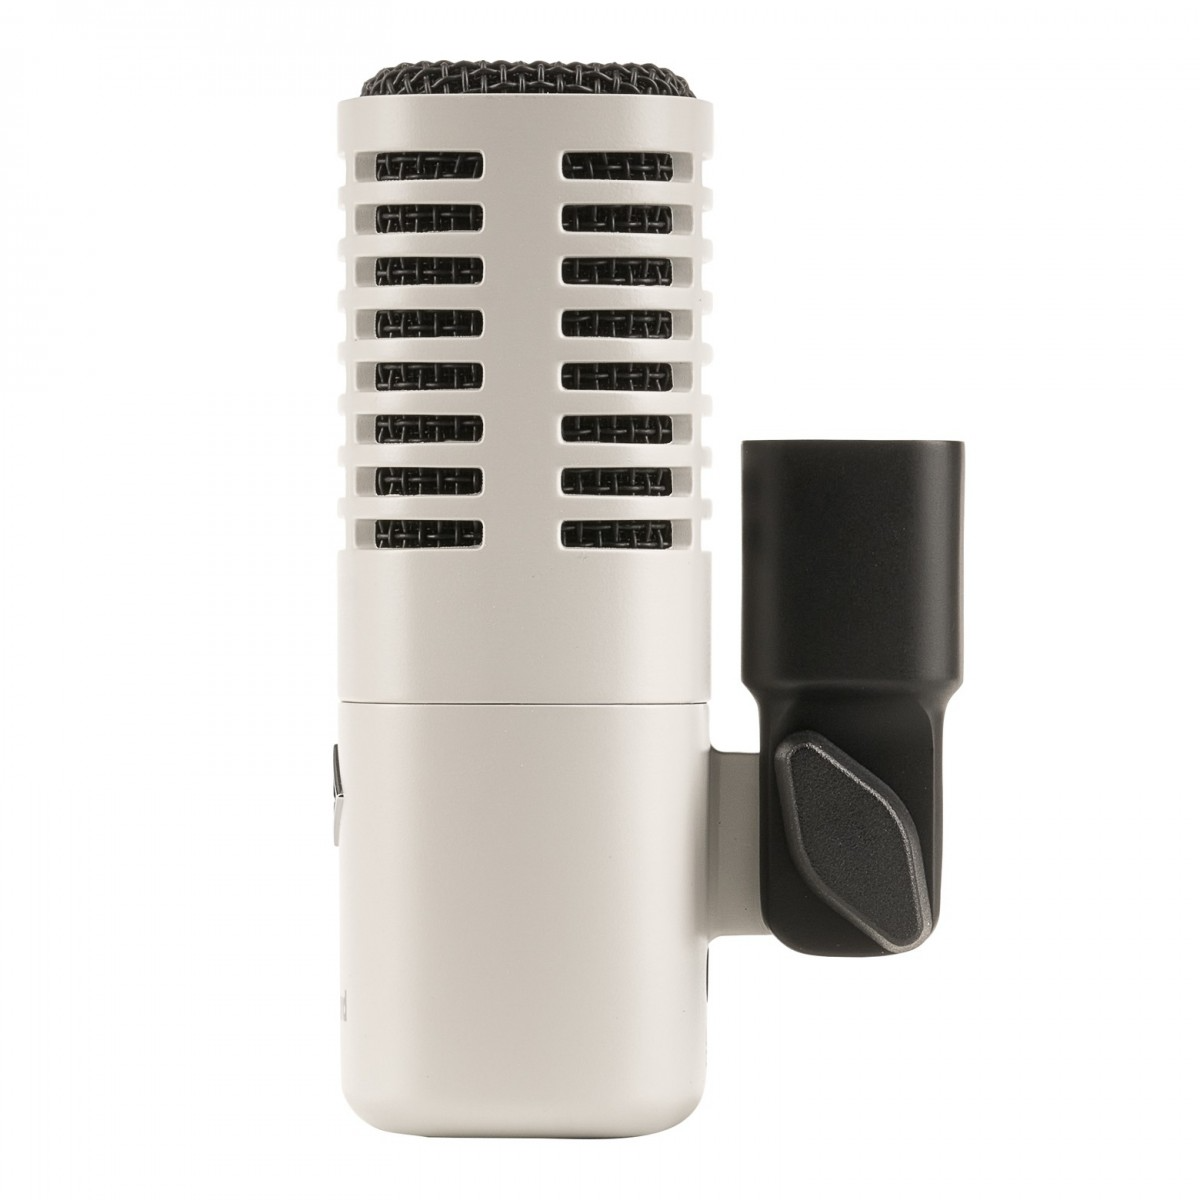 Universal Audio SD-7 Dynamic Microphone with Hemisphere Modelling